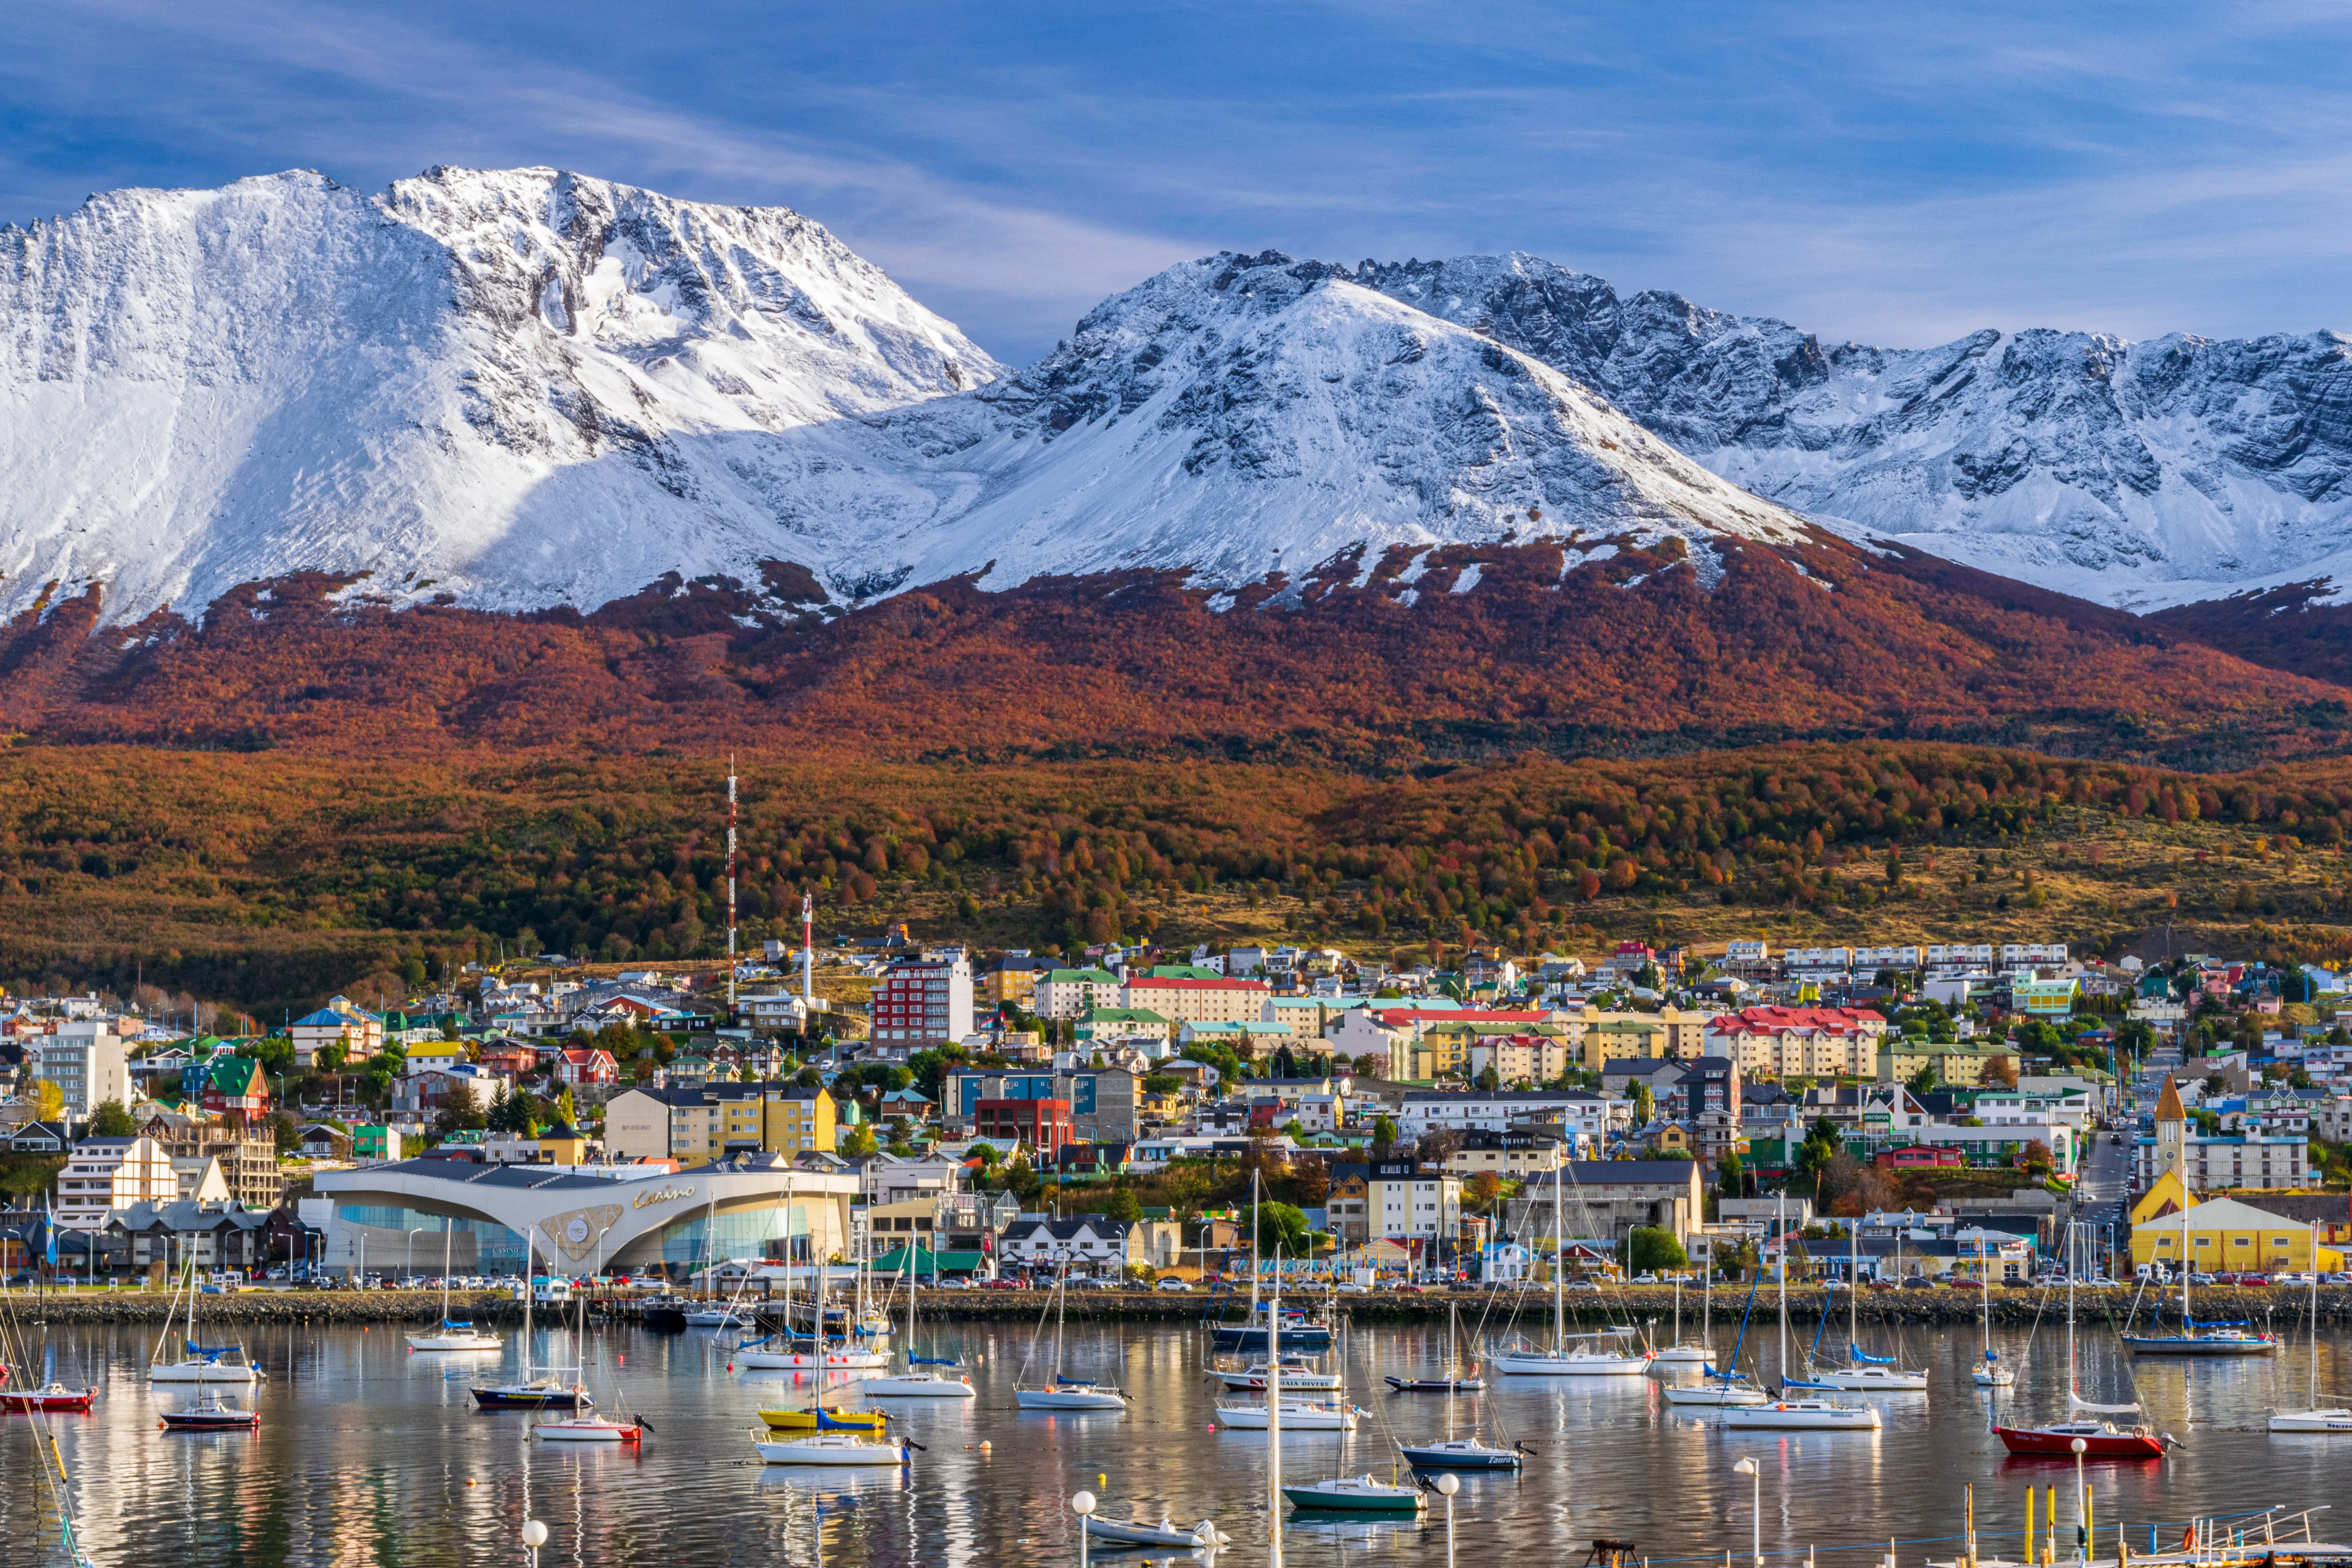 700 miles off the tip of Antarctica, Ushuaia is the land of the legendary beauty